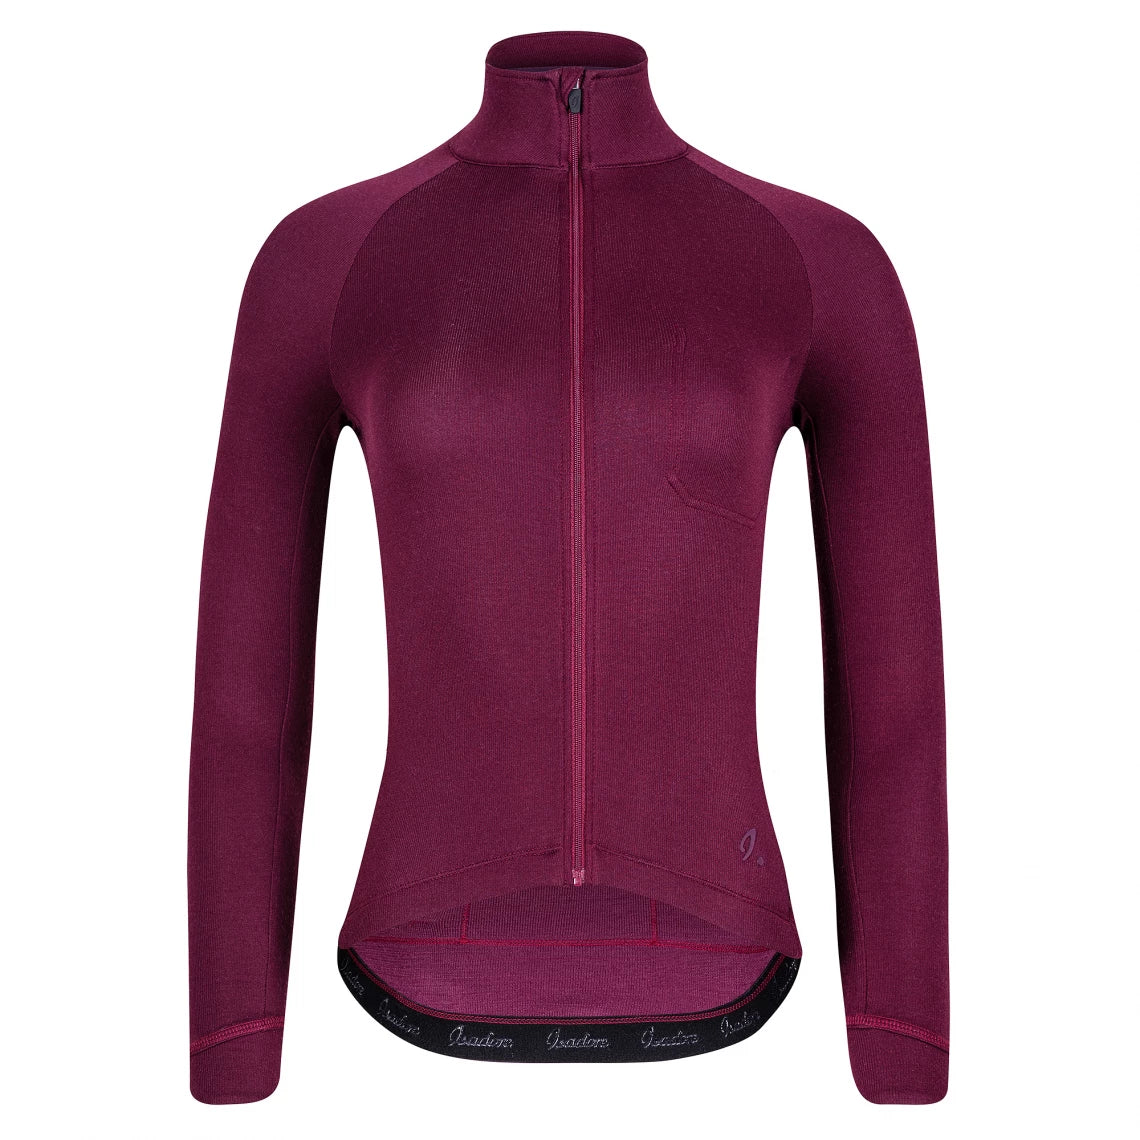 Isadore Women's Signature Thermal LS Jersey